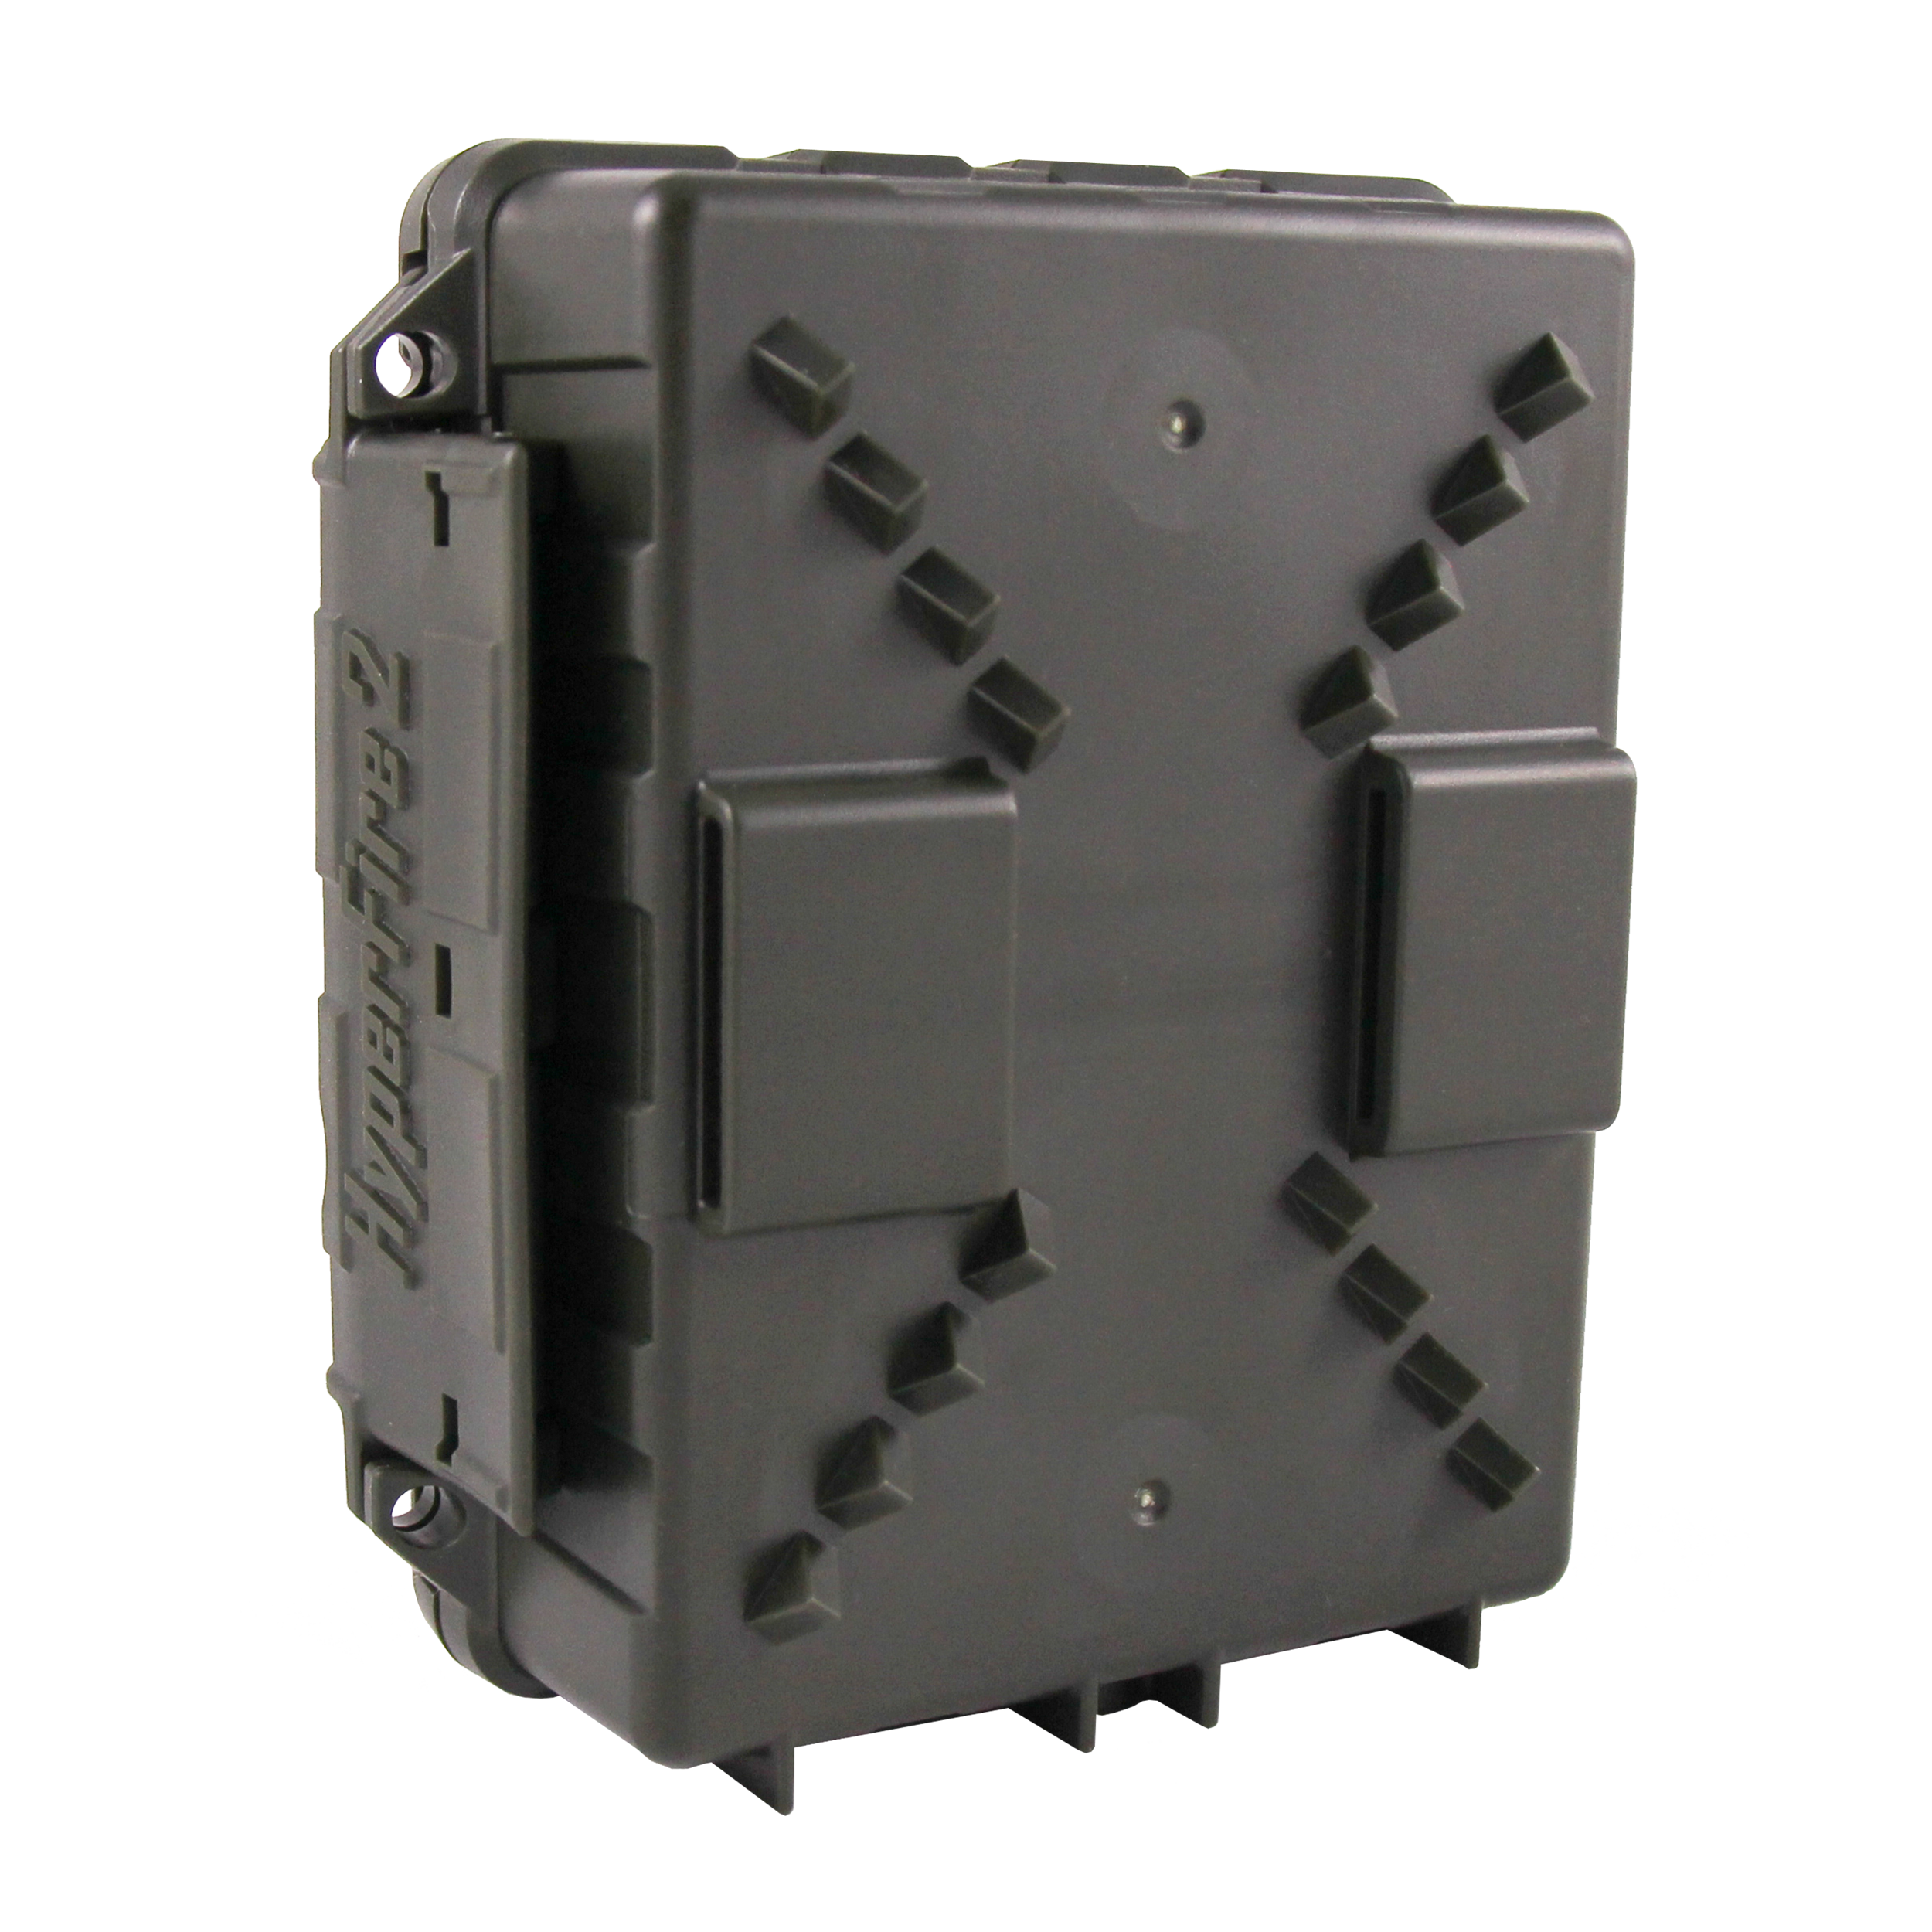 NEW Reconyx HyperFire 2 Series Security Enclosure 